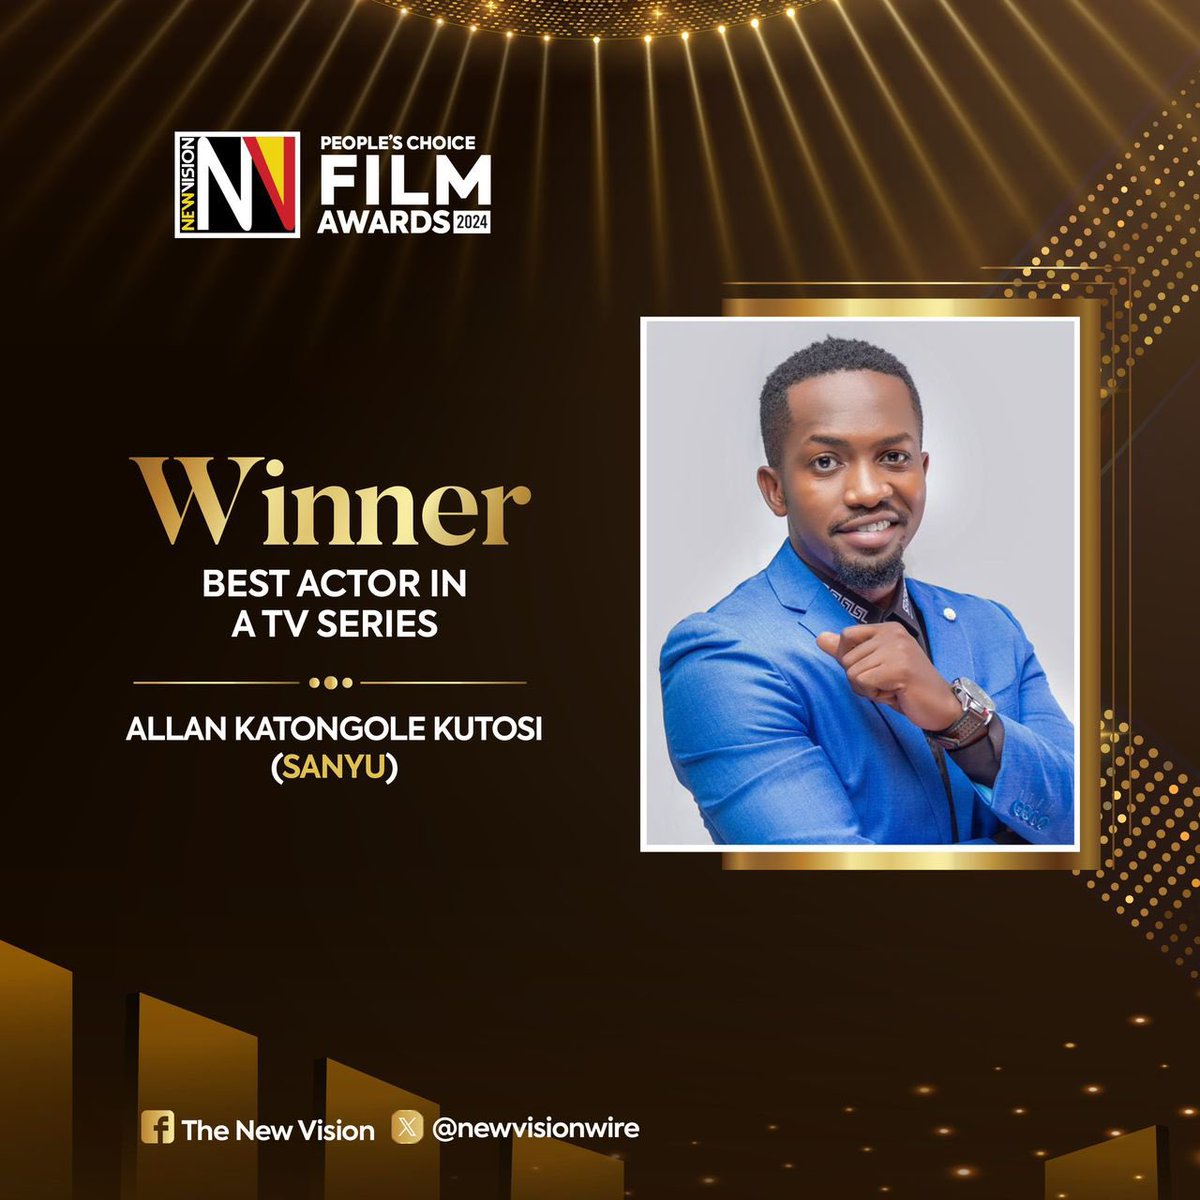 Congratulations @AllanKutos upon winning the award for Best Actor in a TV series (Sanyu) at the New Vision people’s choice Awards. @nabwisom indeed has good taste for choice of actors. Same award was bagged last year by the same. Really deserving! @newvisionwire @ikonawards